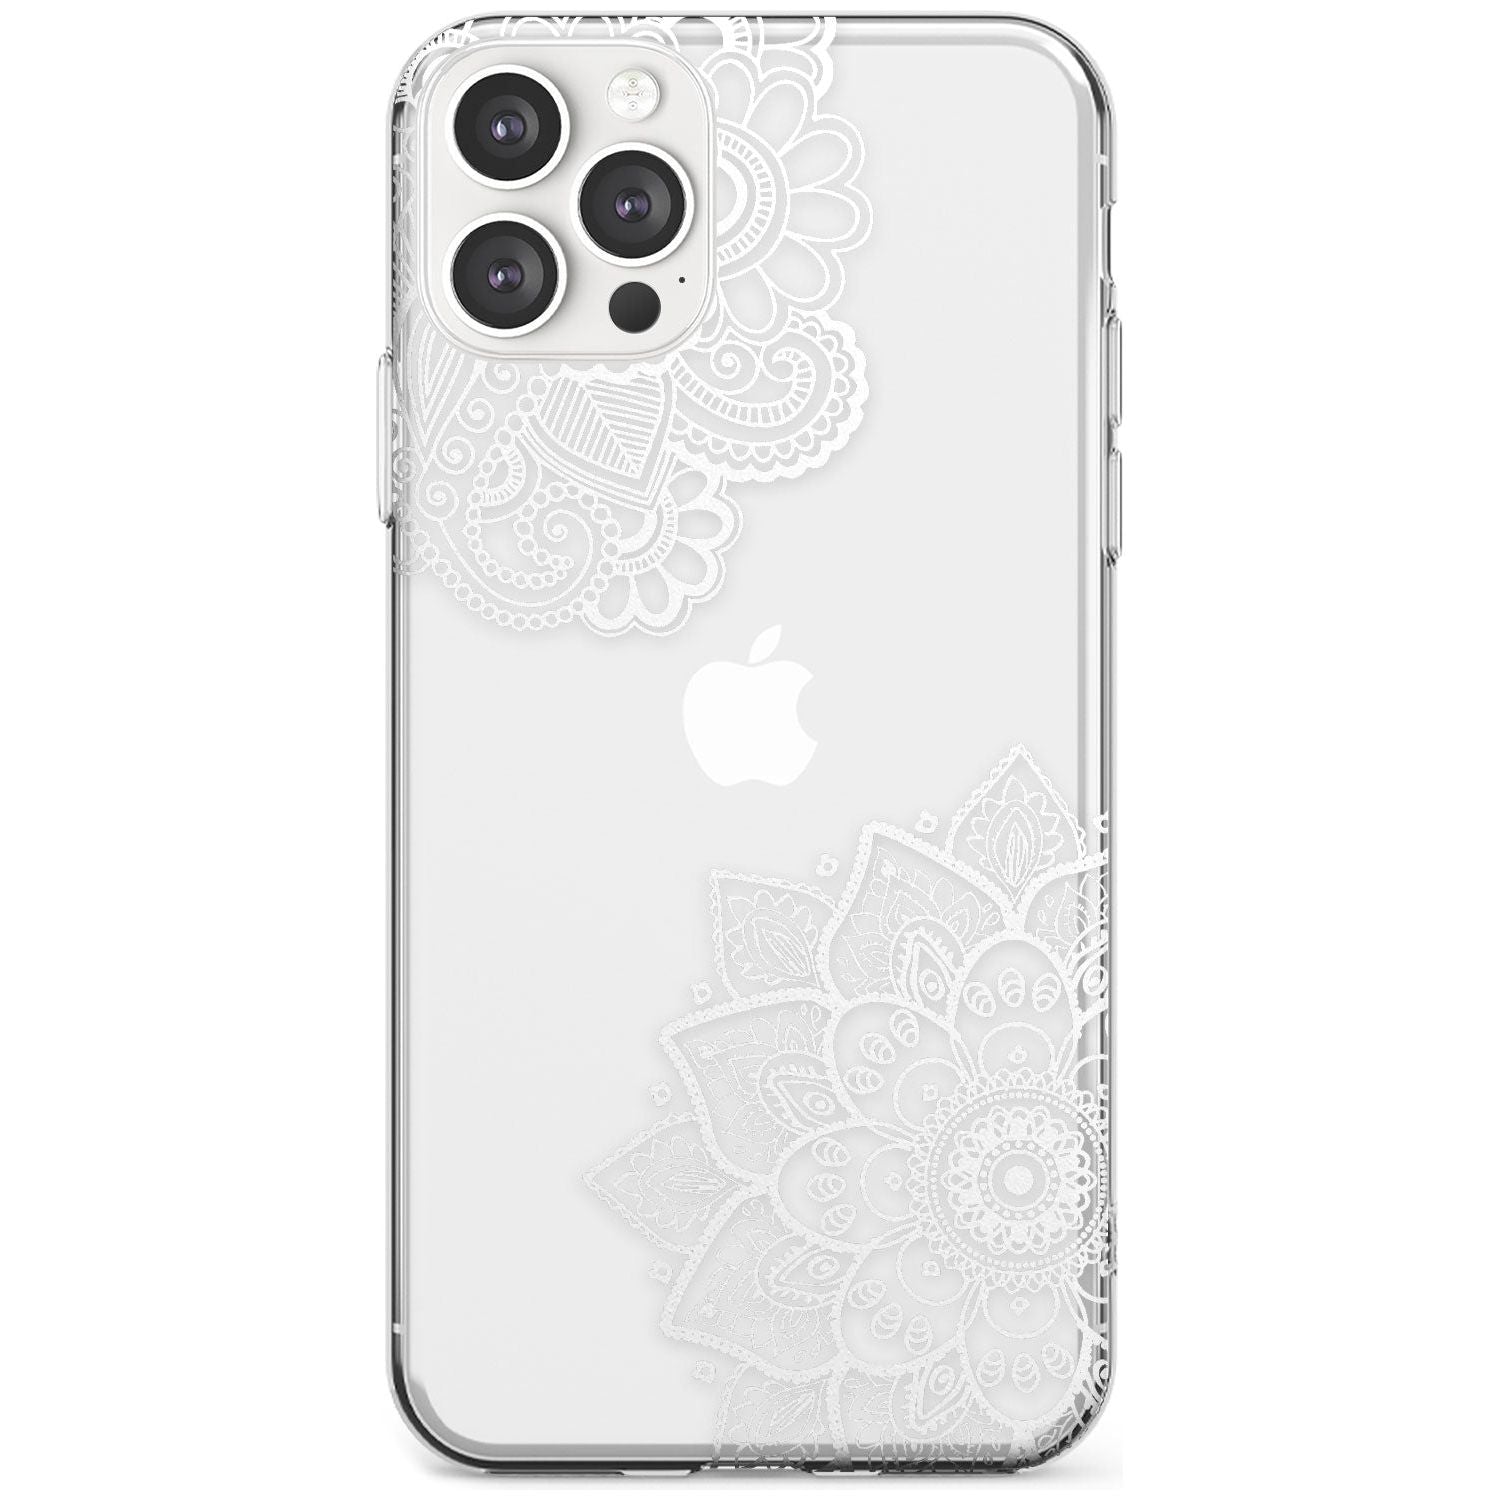 White Henna Florals Slim TPU Phone Case for iPhone 11 Pro Max